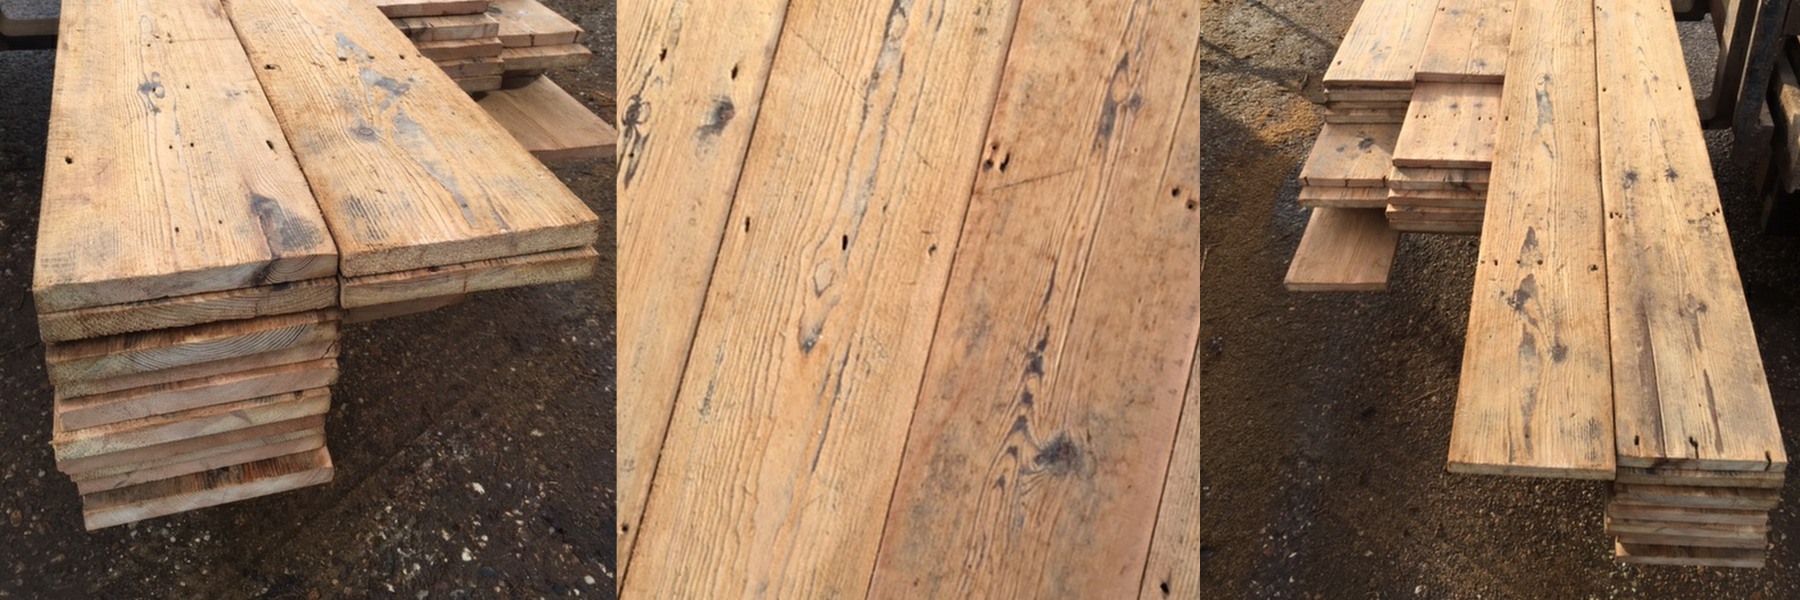 Hand finished period pine floor board from treesave reclamation yard suffolk essex